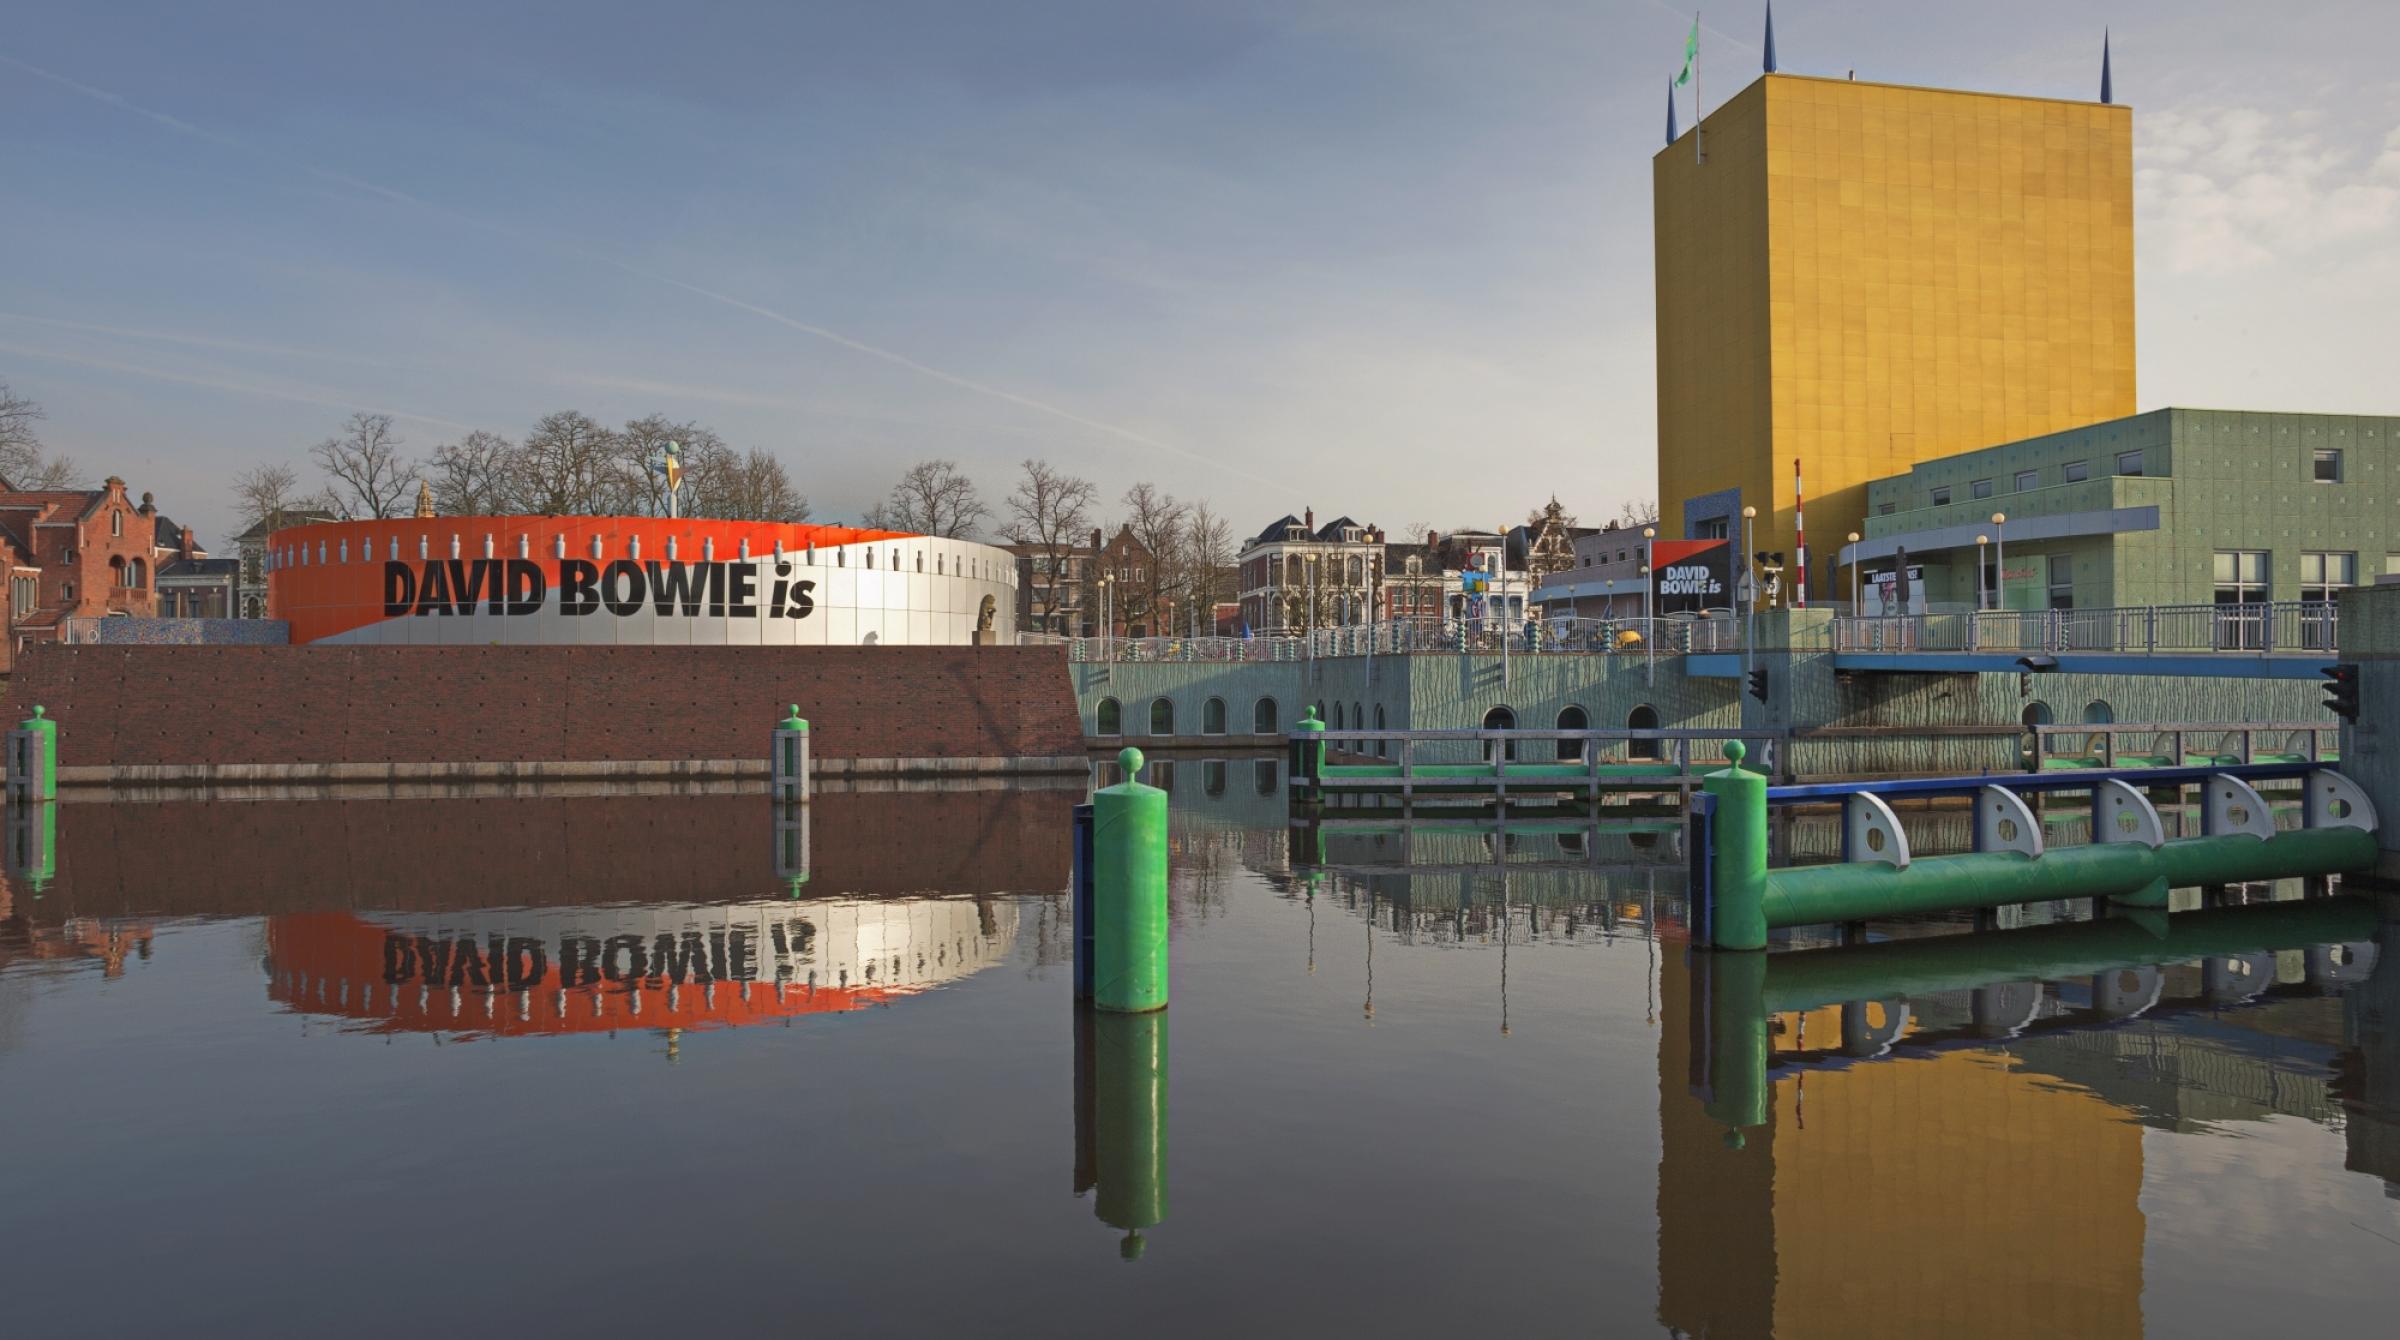 David Bowie Is Groninger Museum